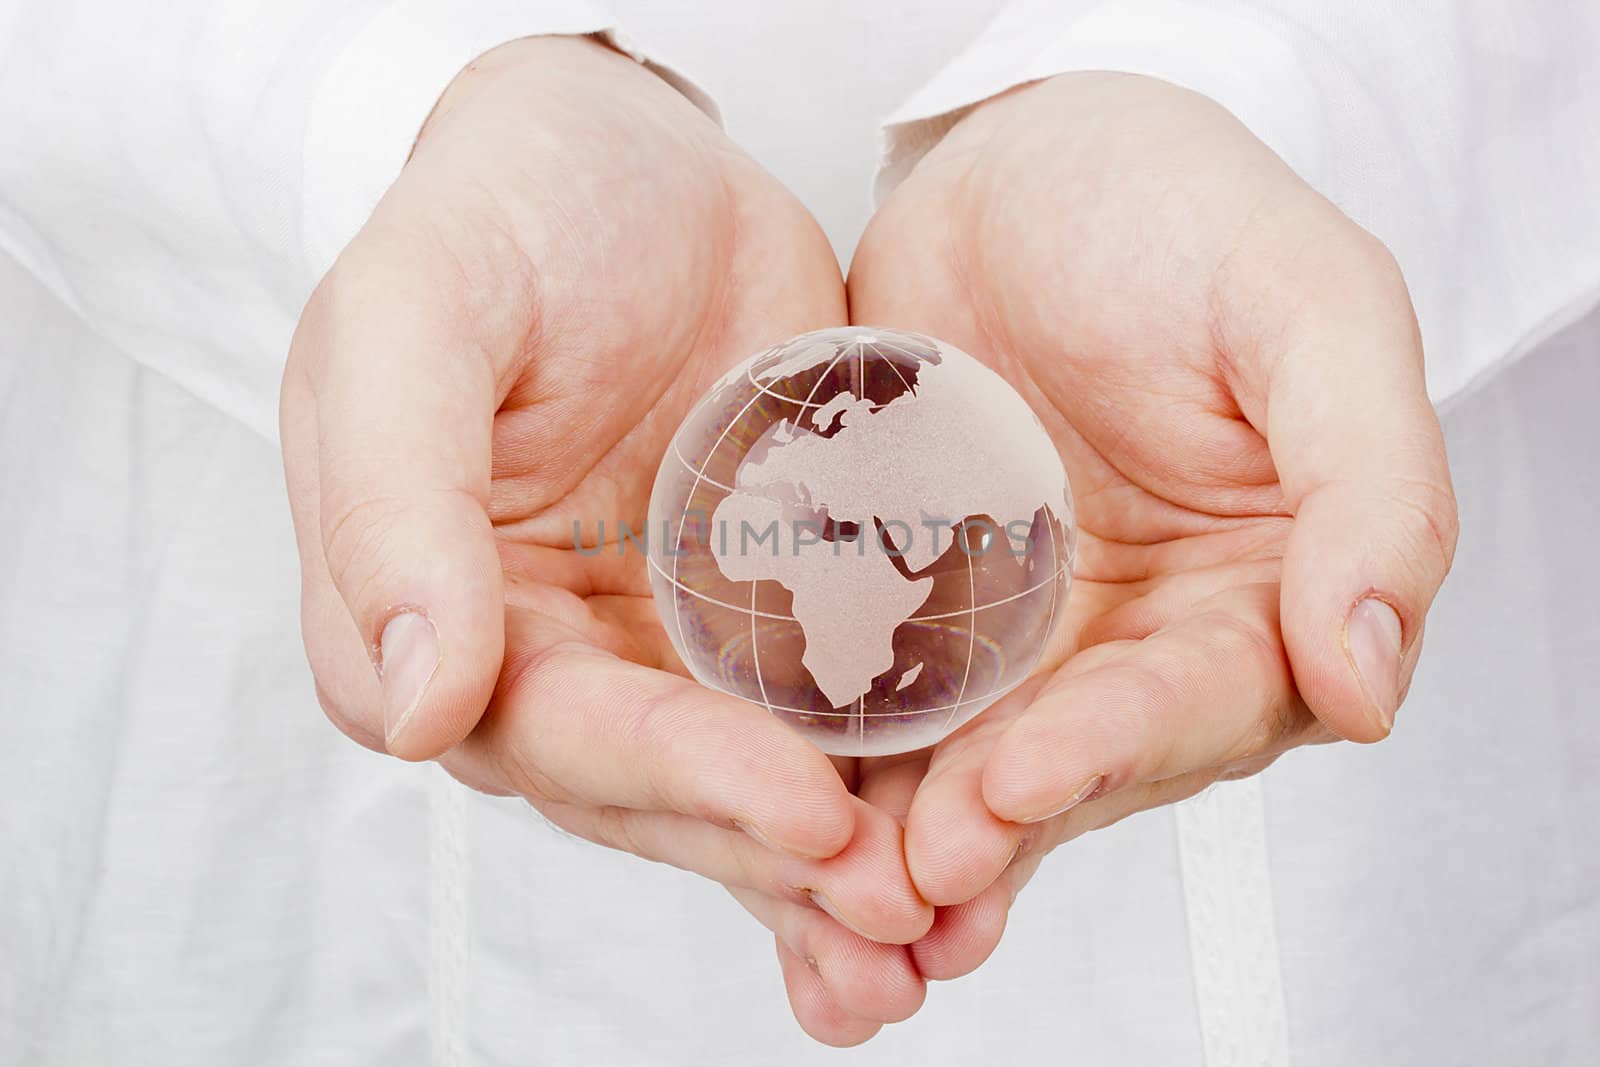 Close-up photograph of a glass globe in man's hands.